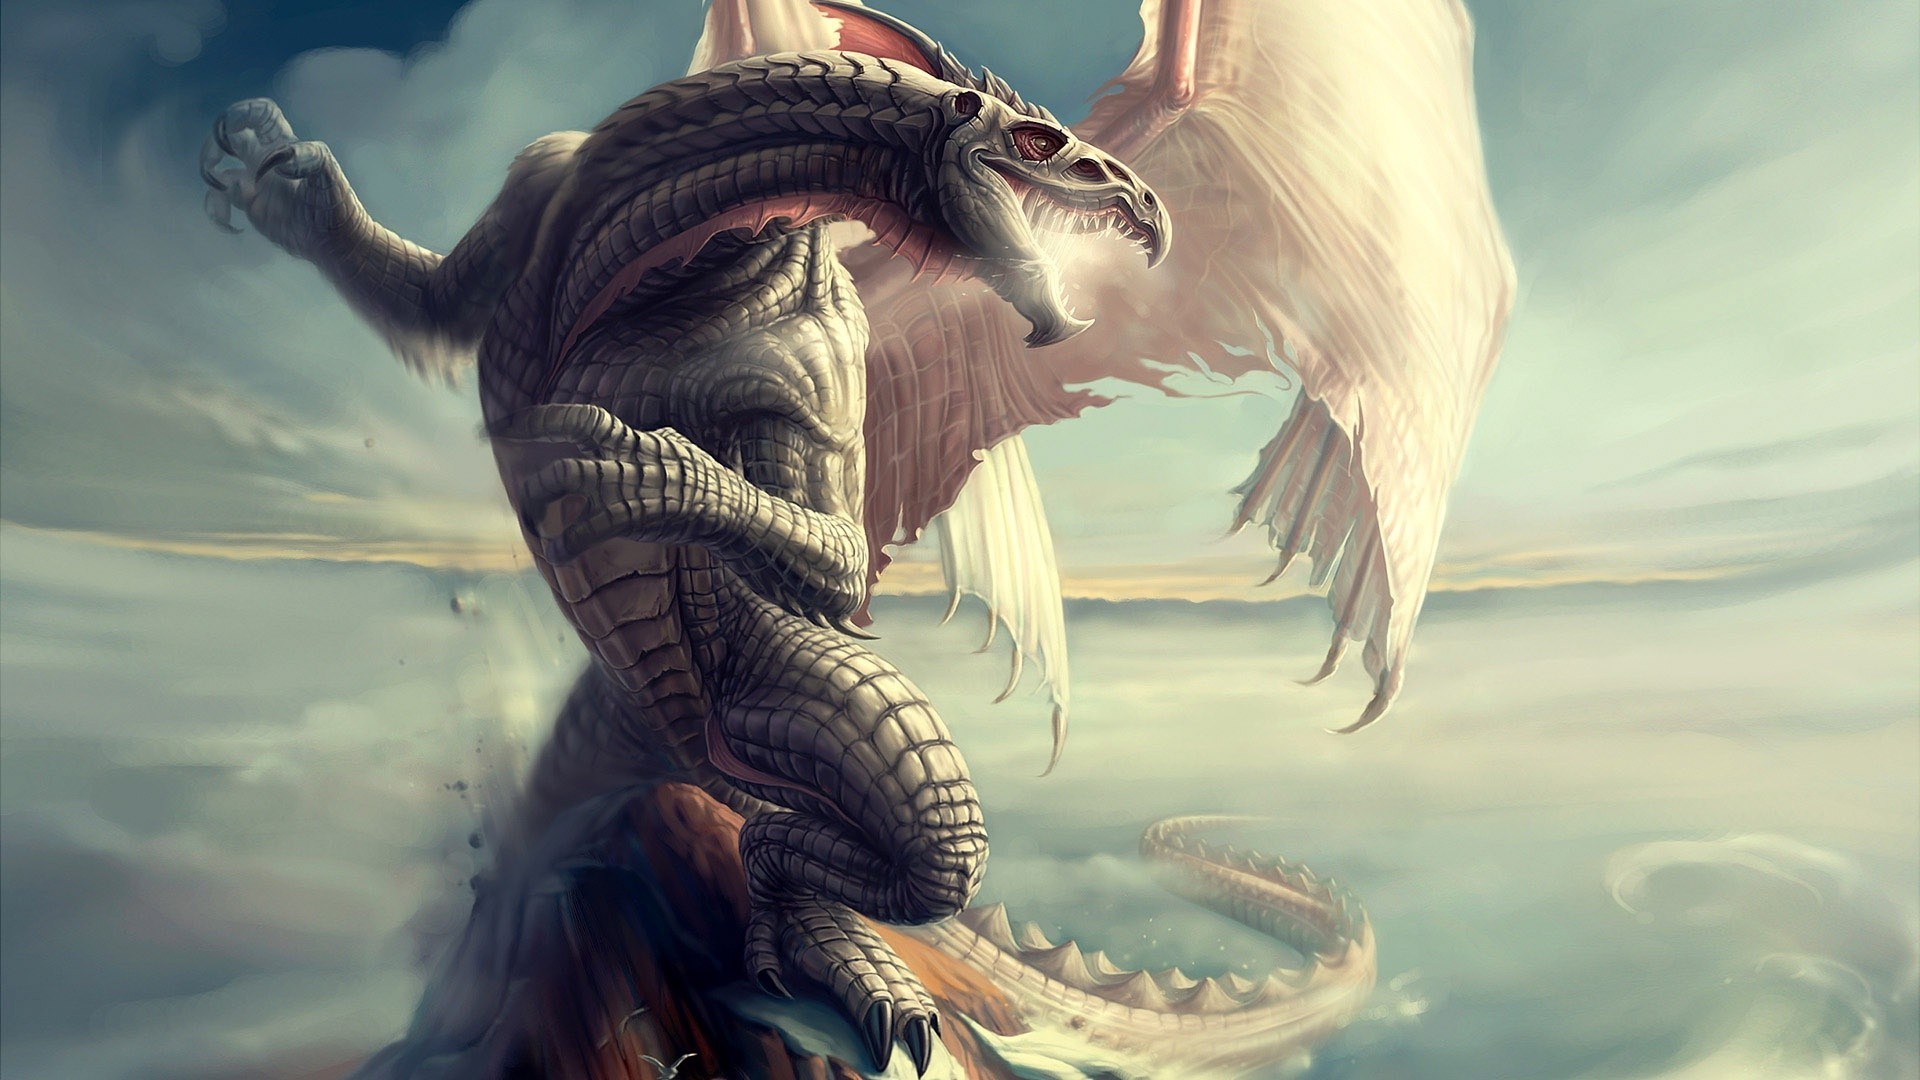 1920x1080 Cool Dragon HD Wallpaper Backgrounds Free Download.